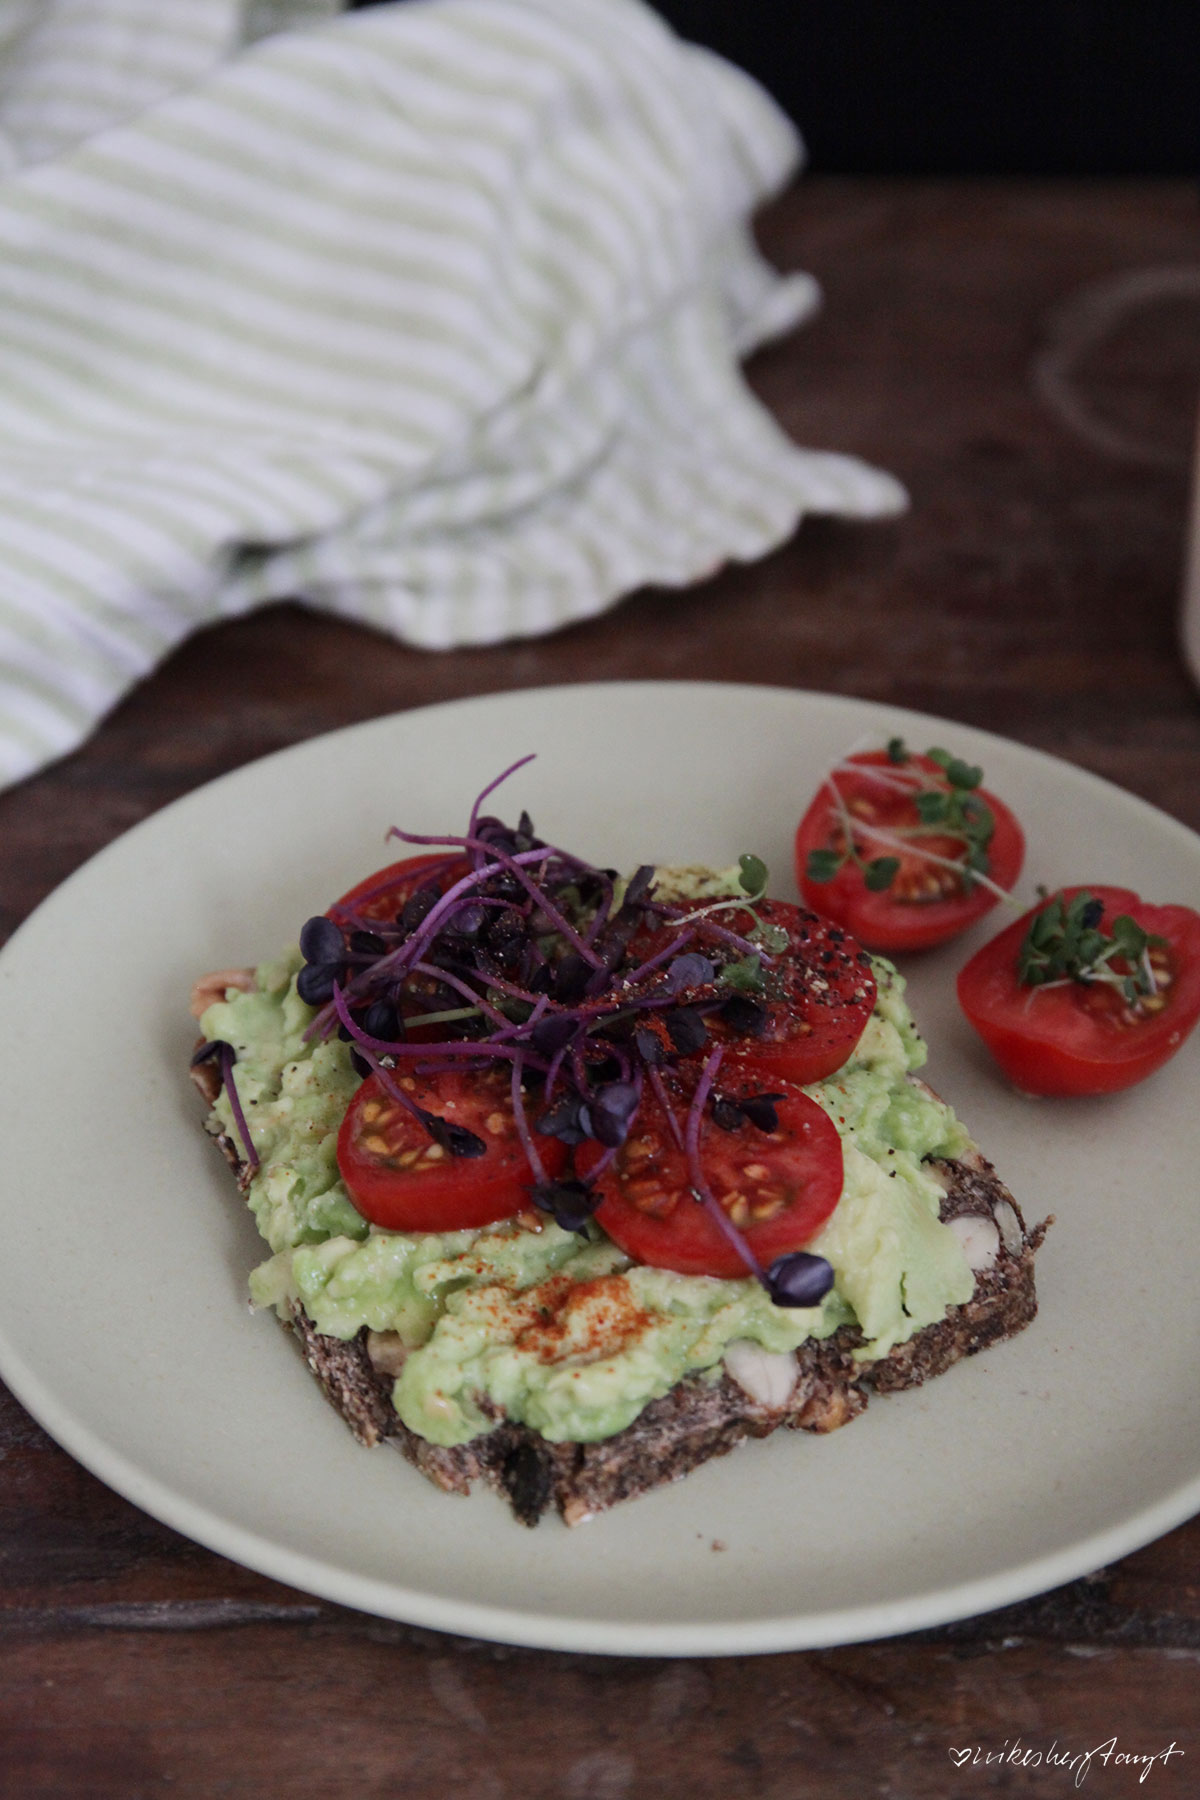 life changing bread with avocado, tomatoes & sprouts